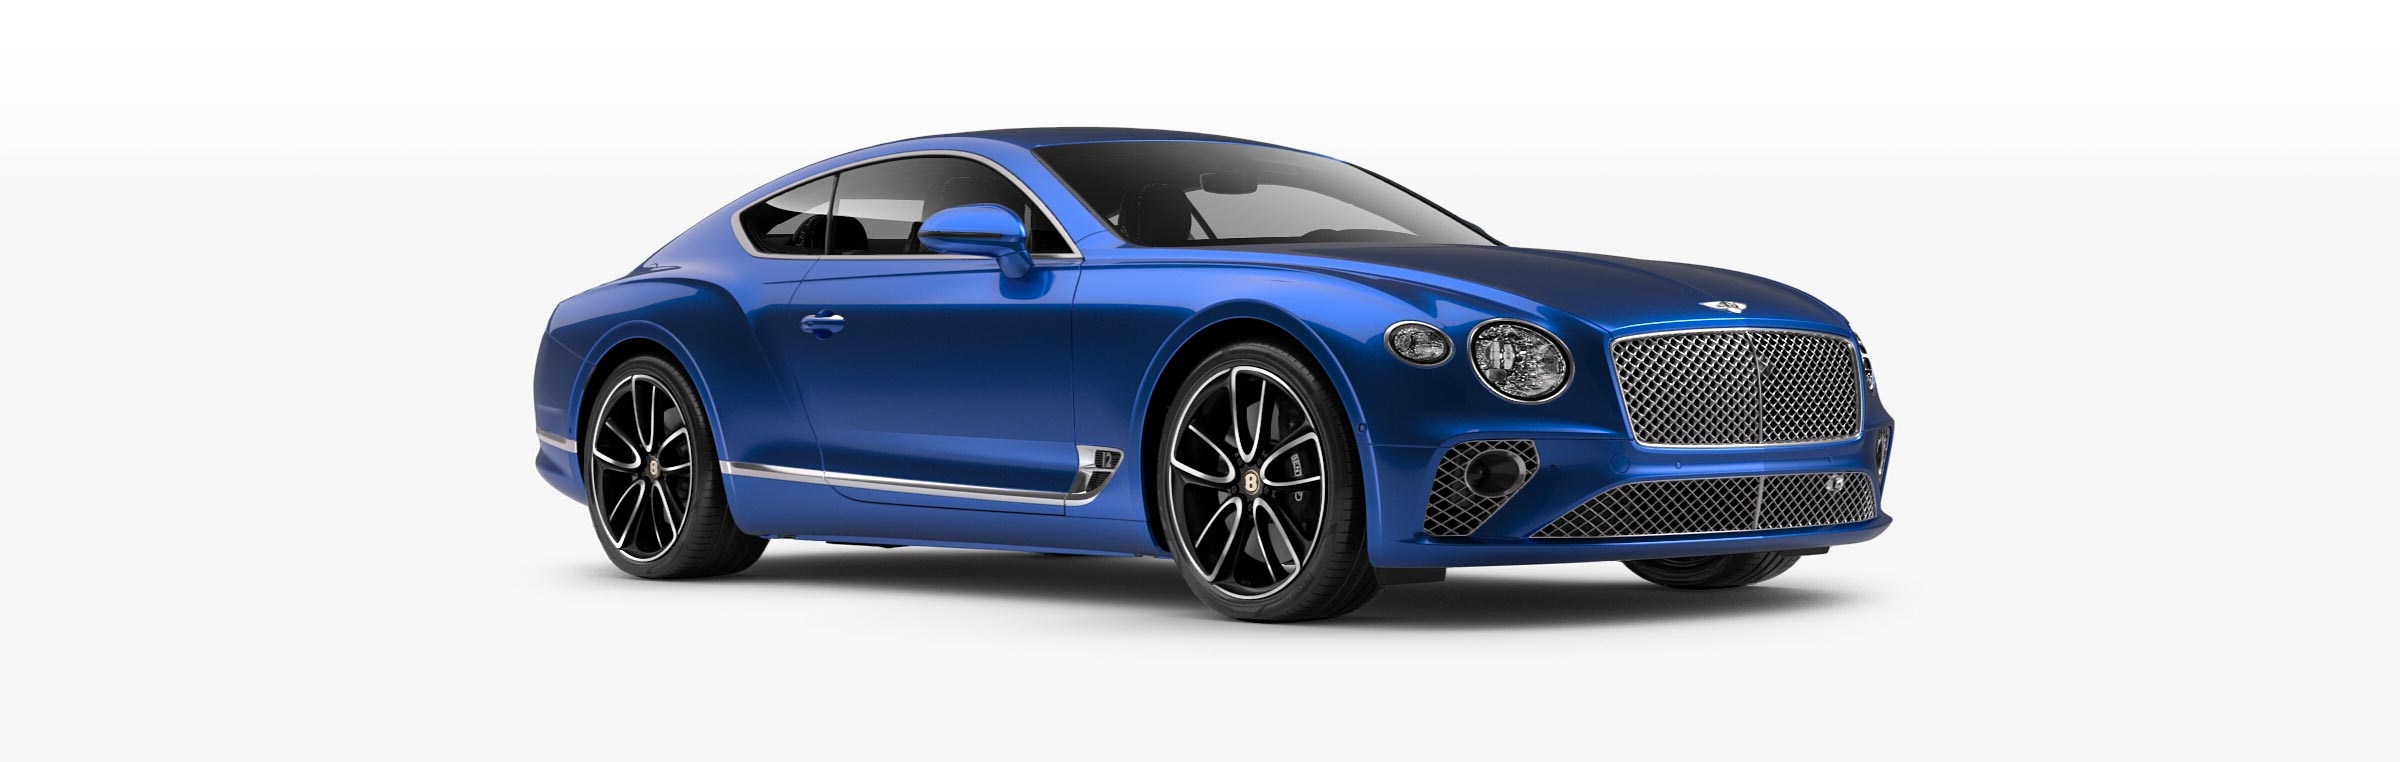 2020 Bently Continental GT - Blue model front view